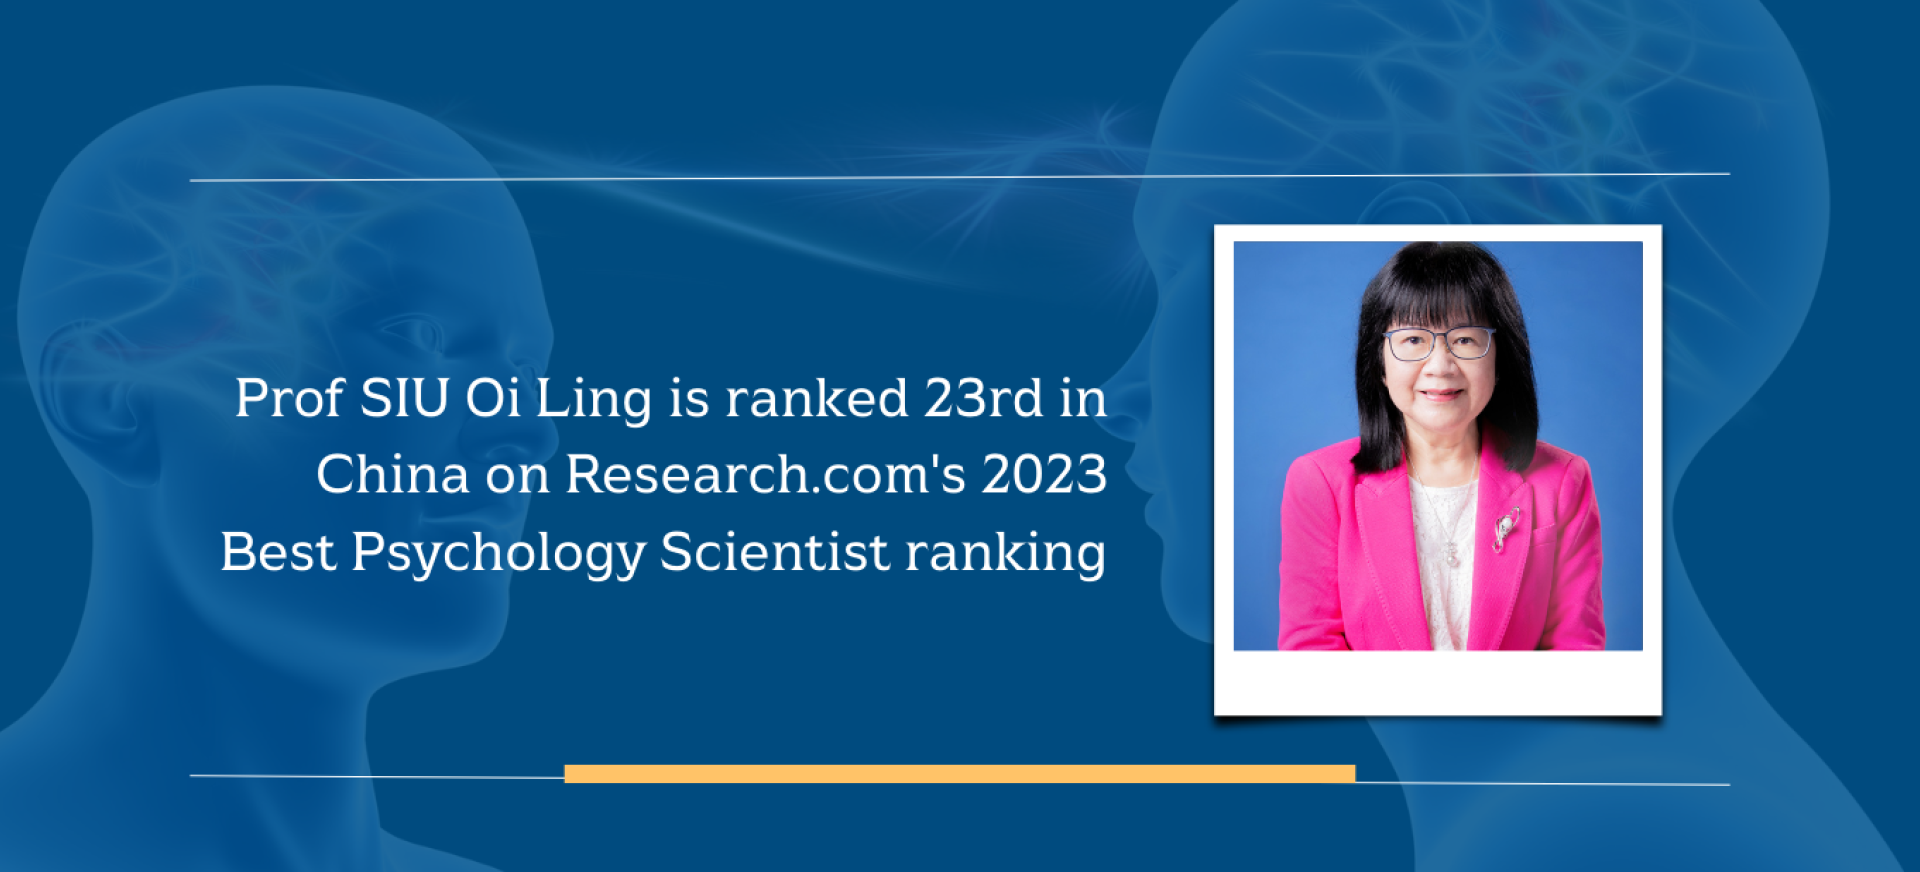 Prof SIU Oi Ling is ranked 23rd in China on Research.com's 2023 Best Psychology Scientist ranking